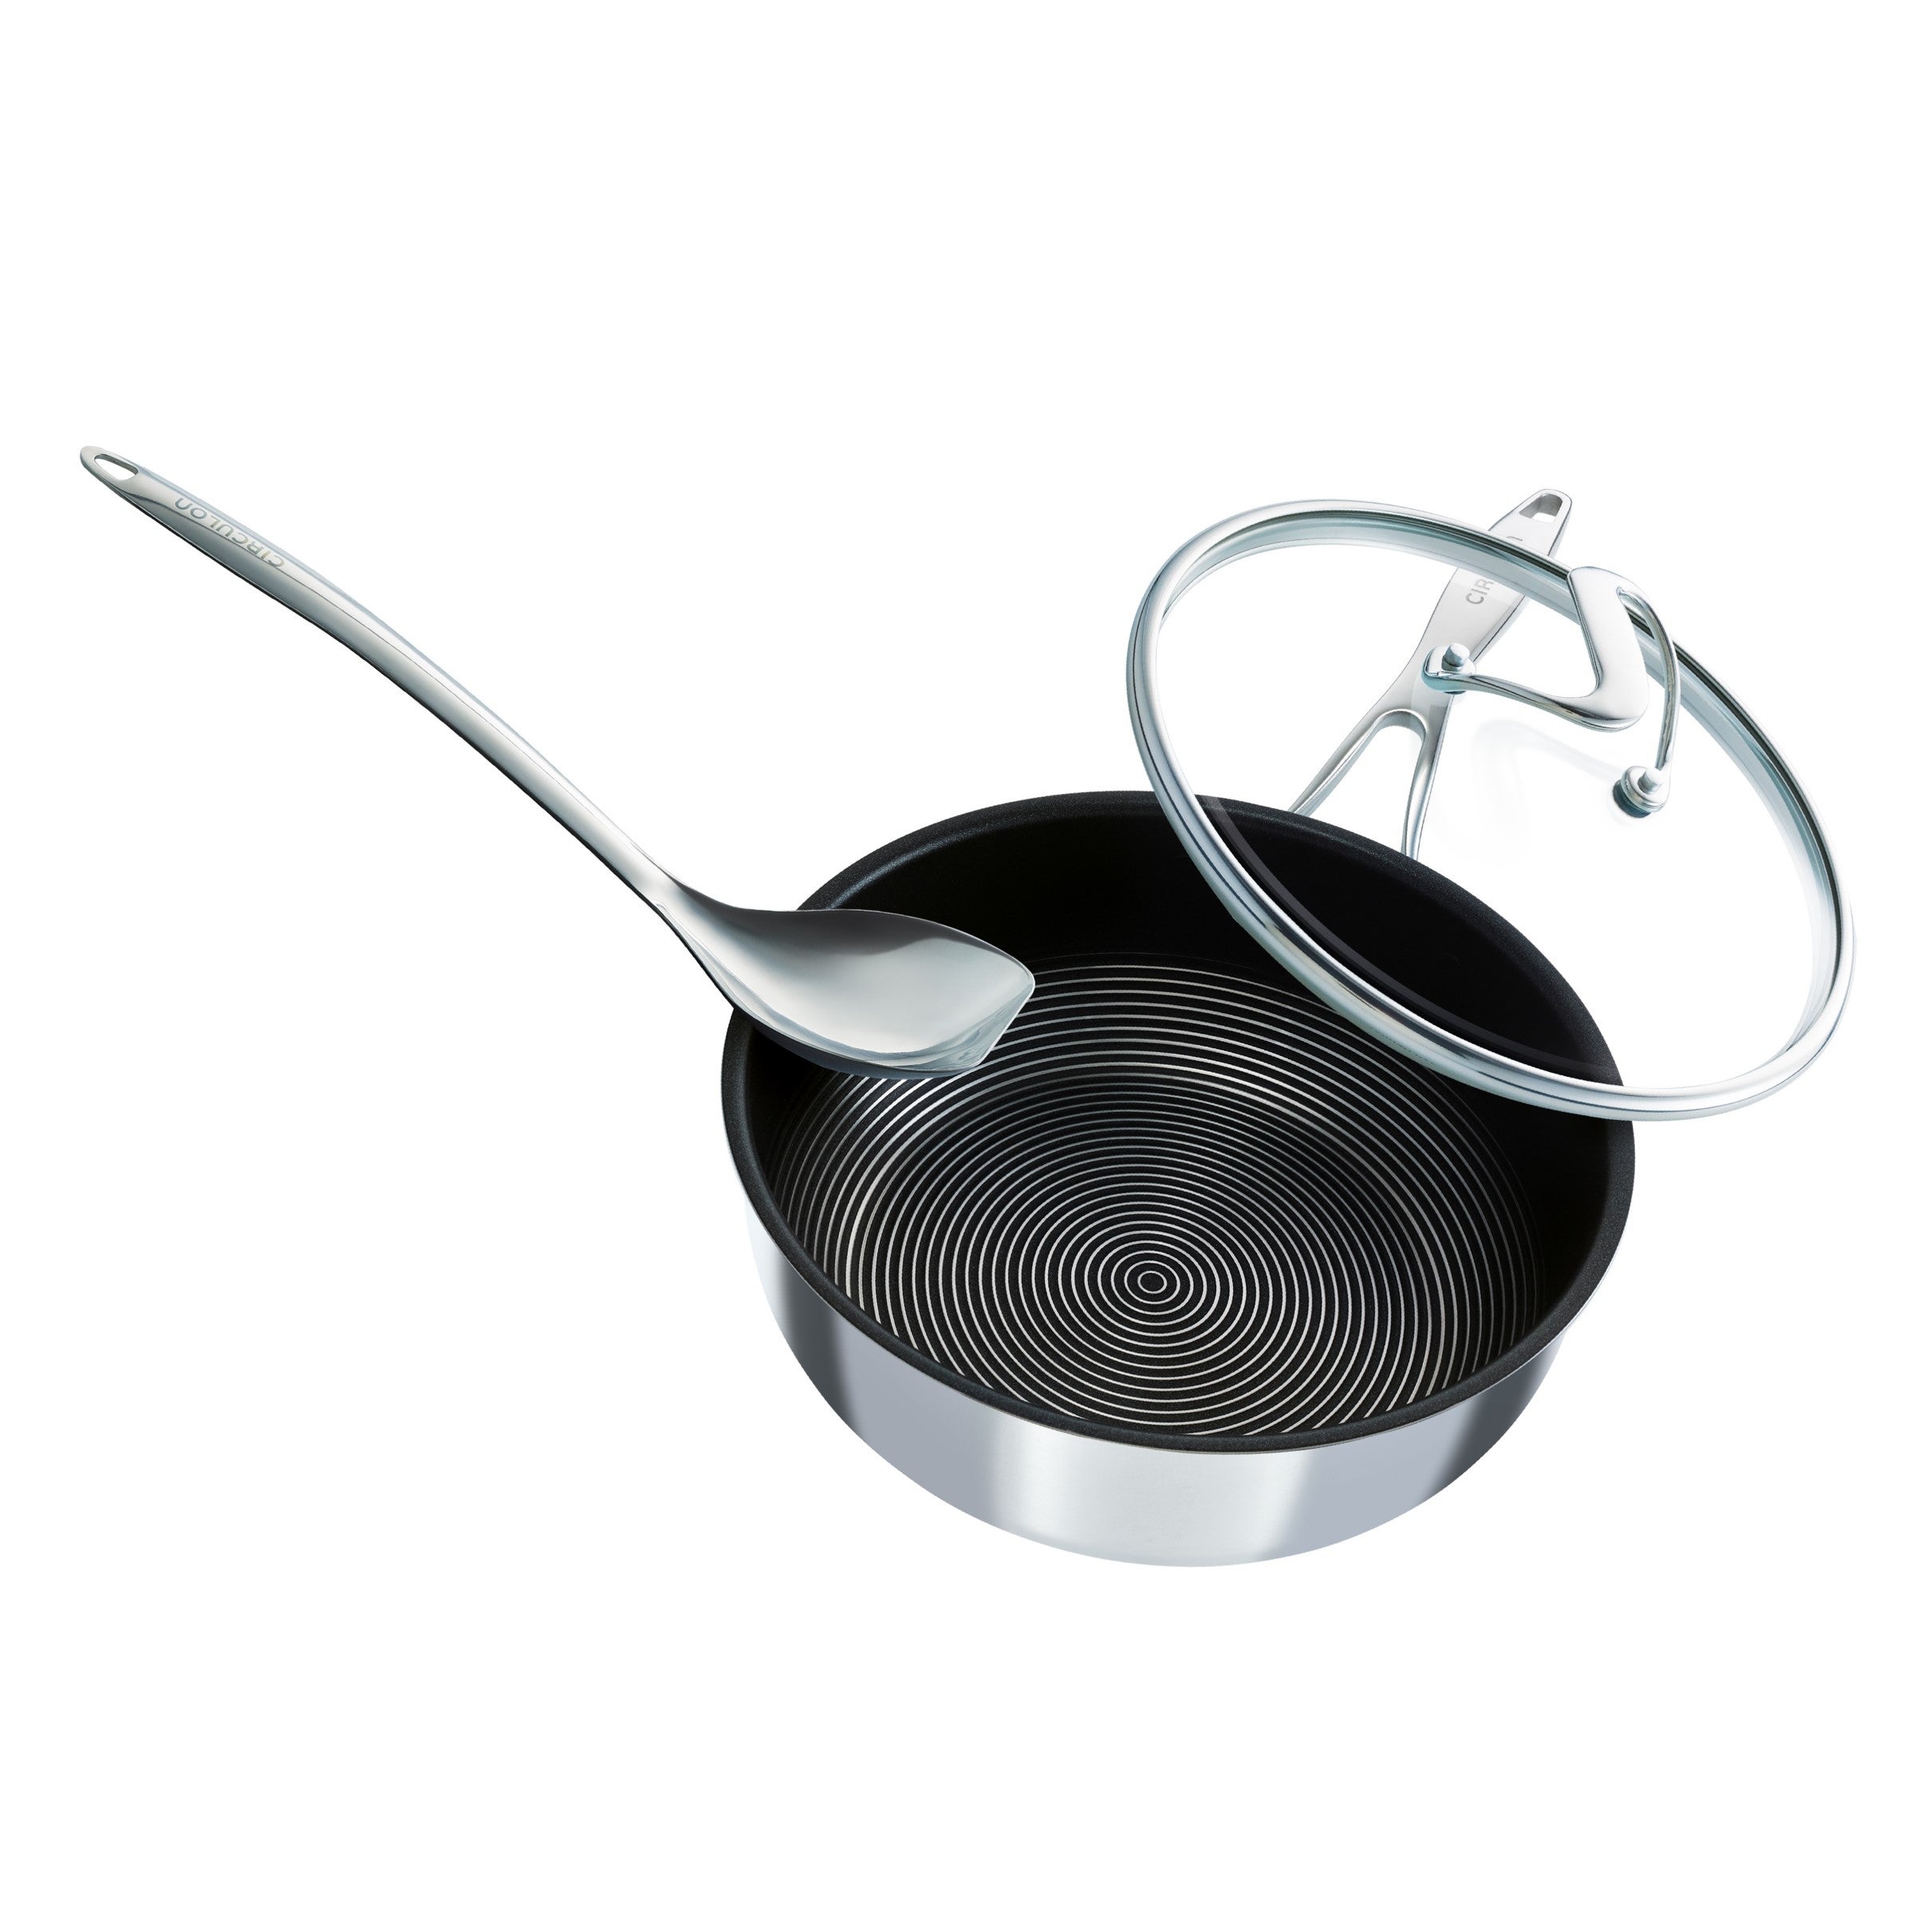 Circulon C Series Non-Stick Tri-Ply Stainless Steel Chef Pan with Lid, 24cm